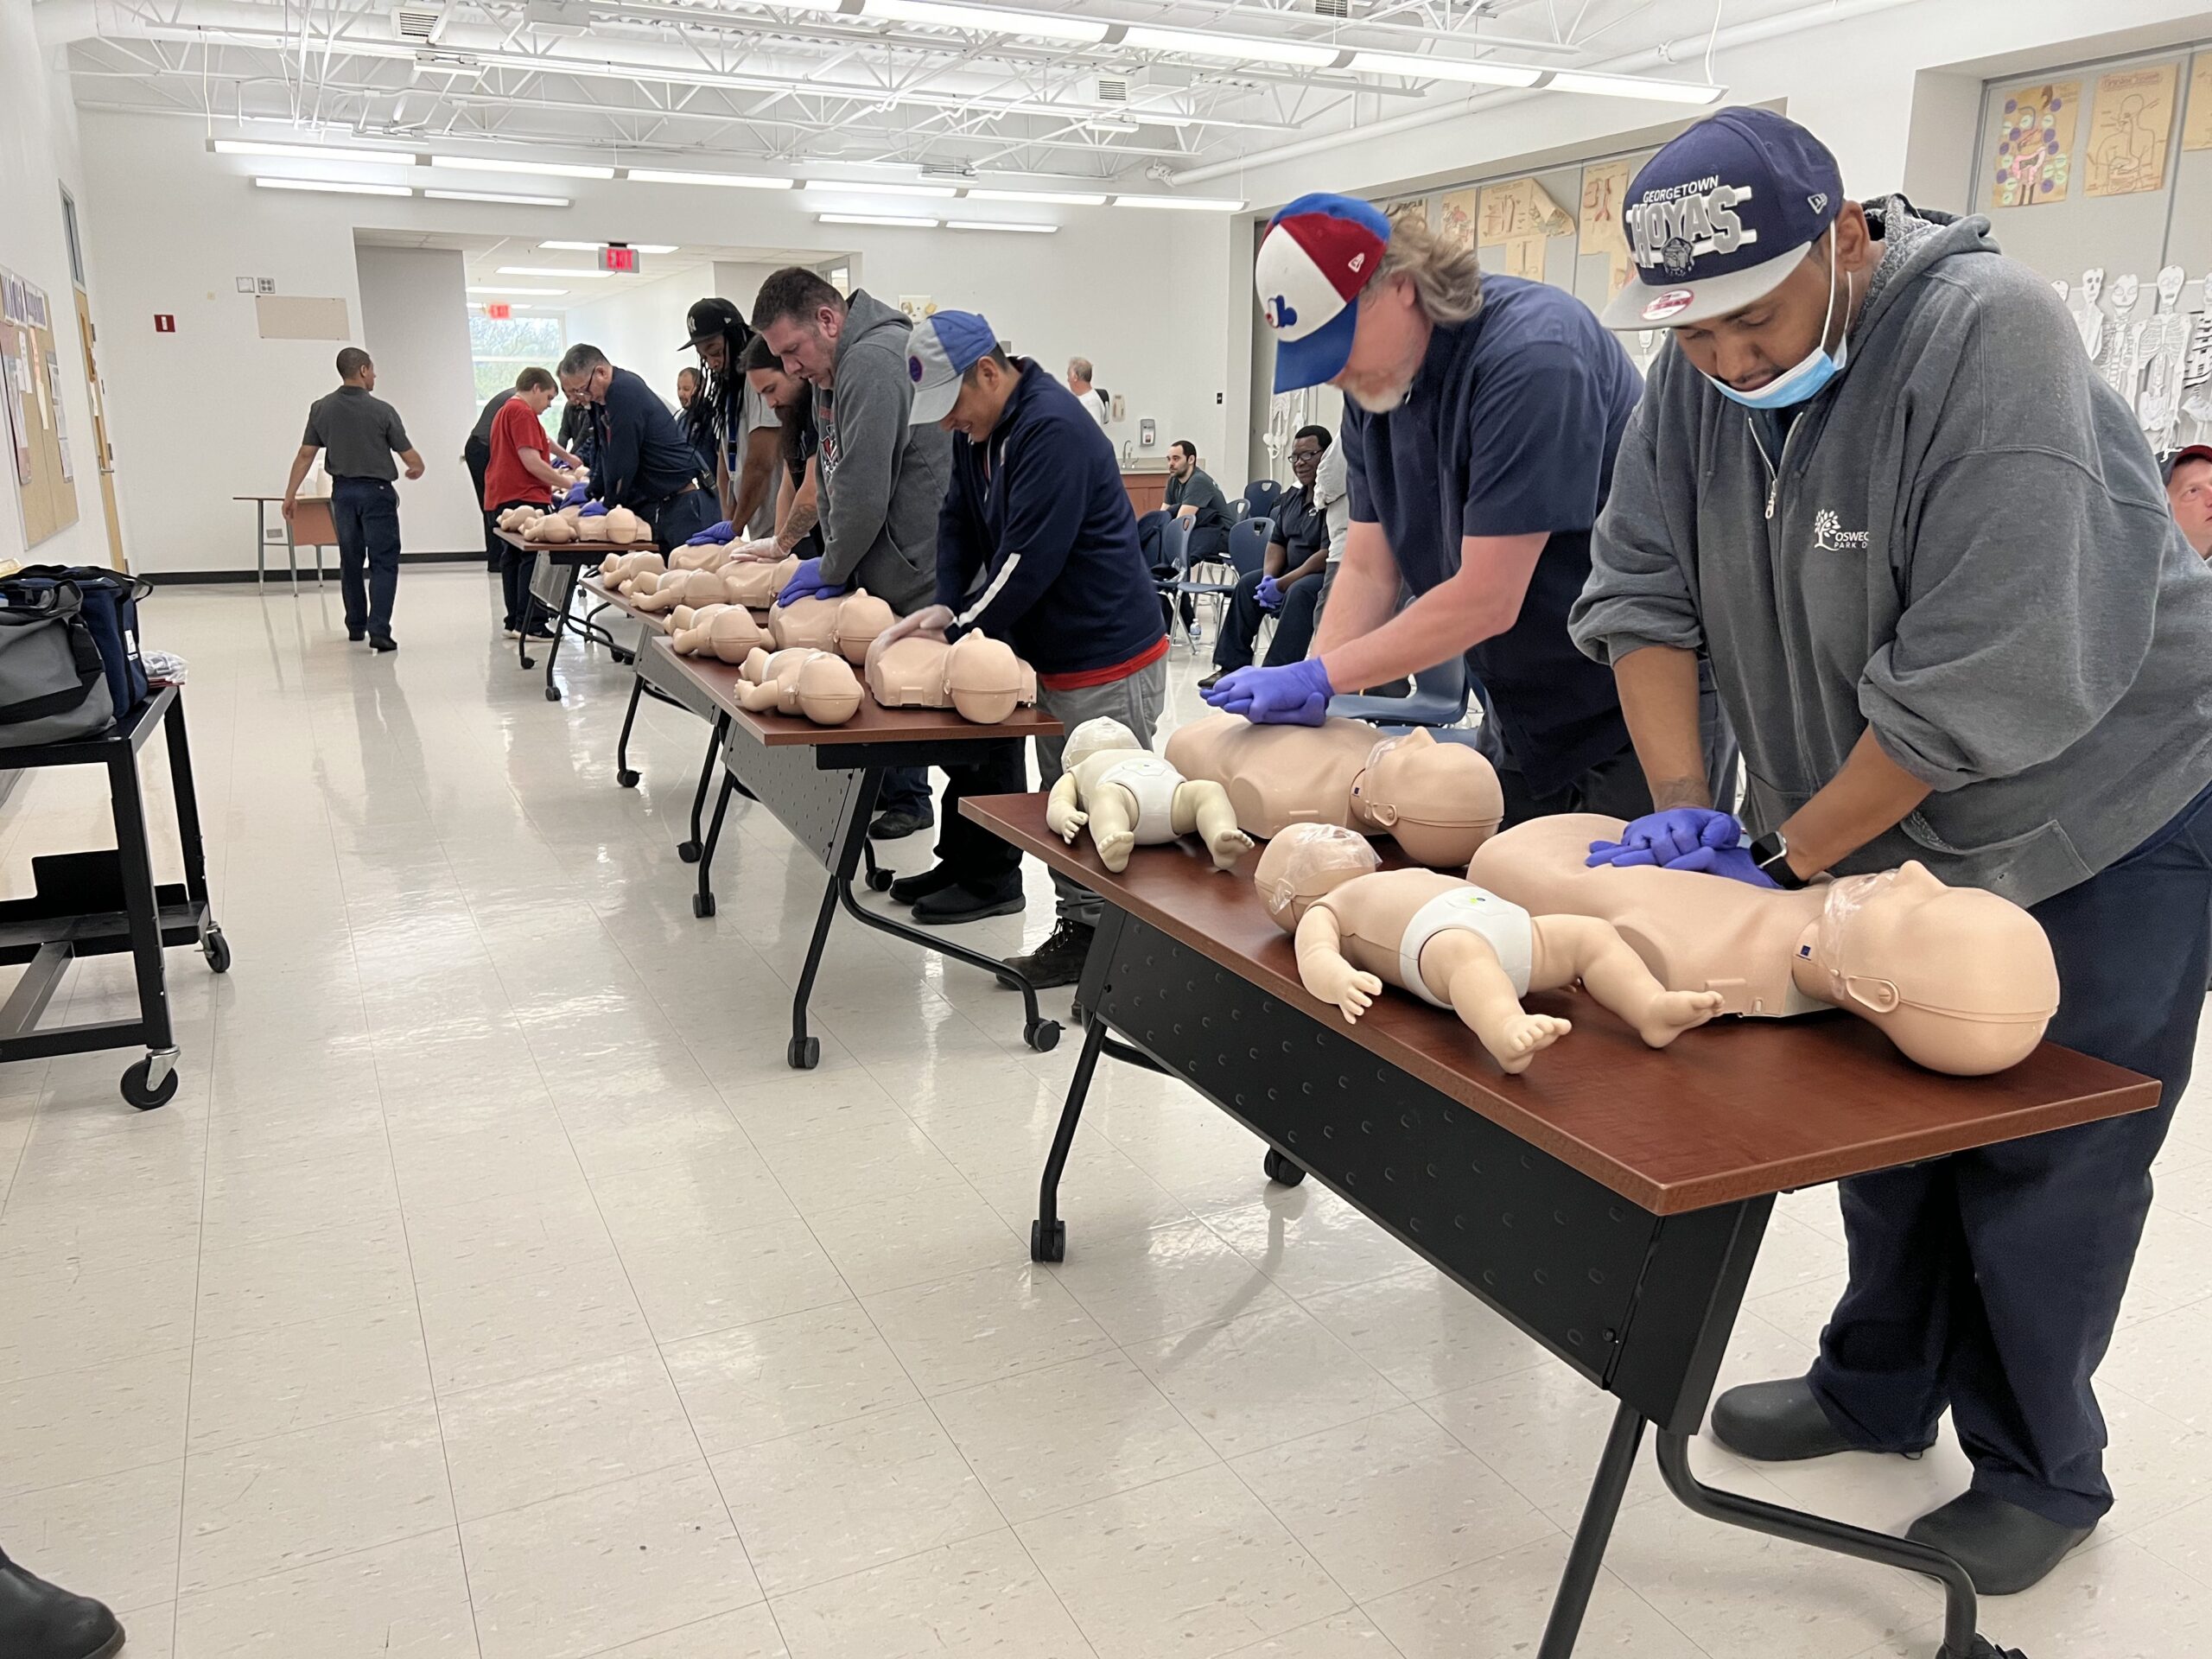 BLS Training Will Teach You High-Quality CPR